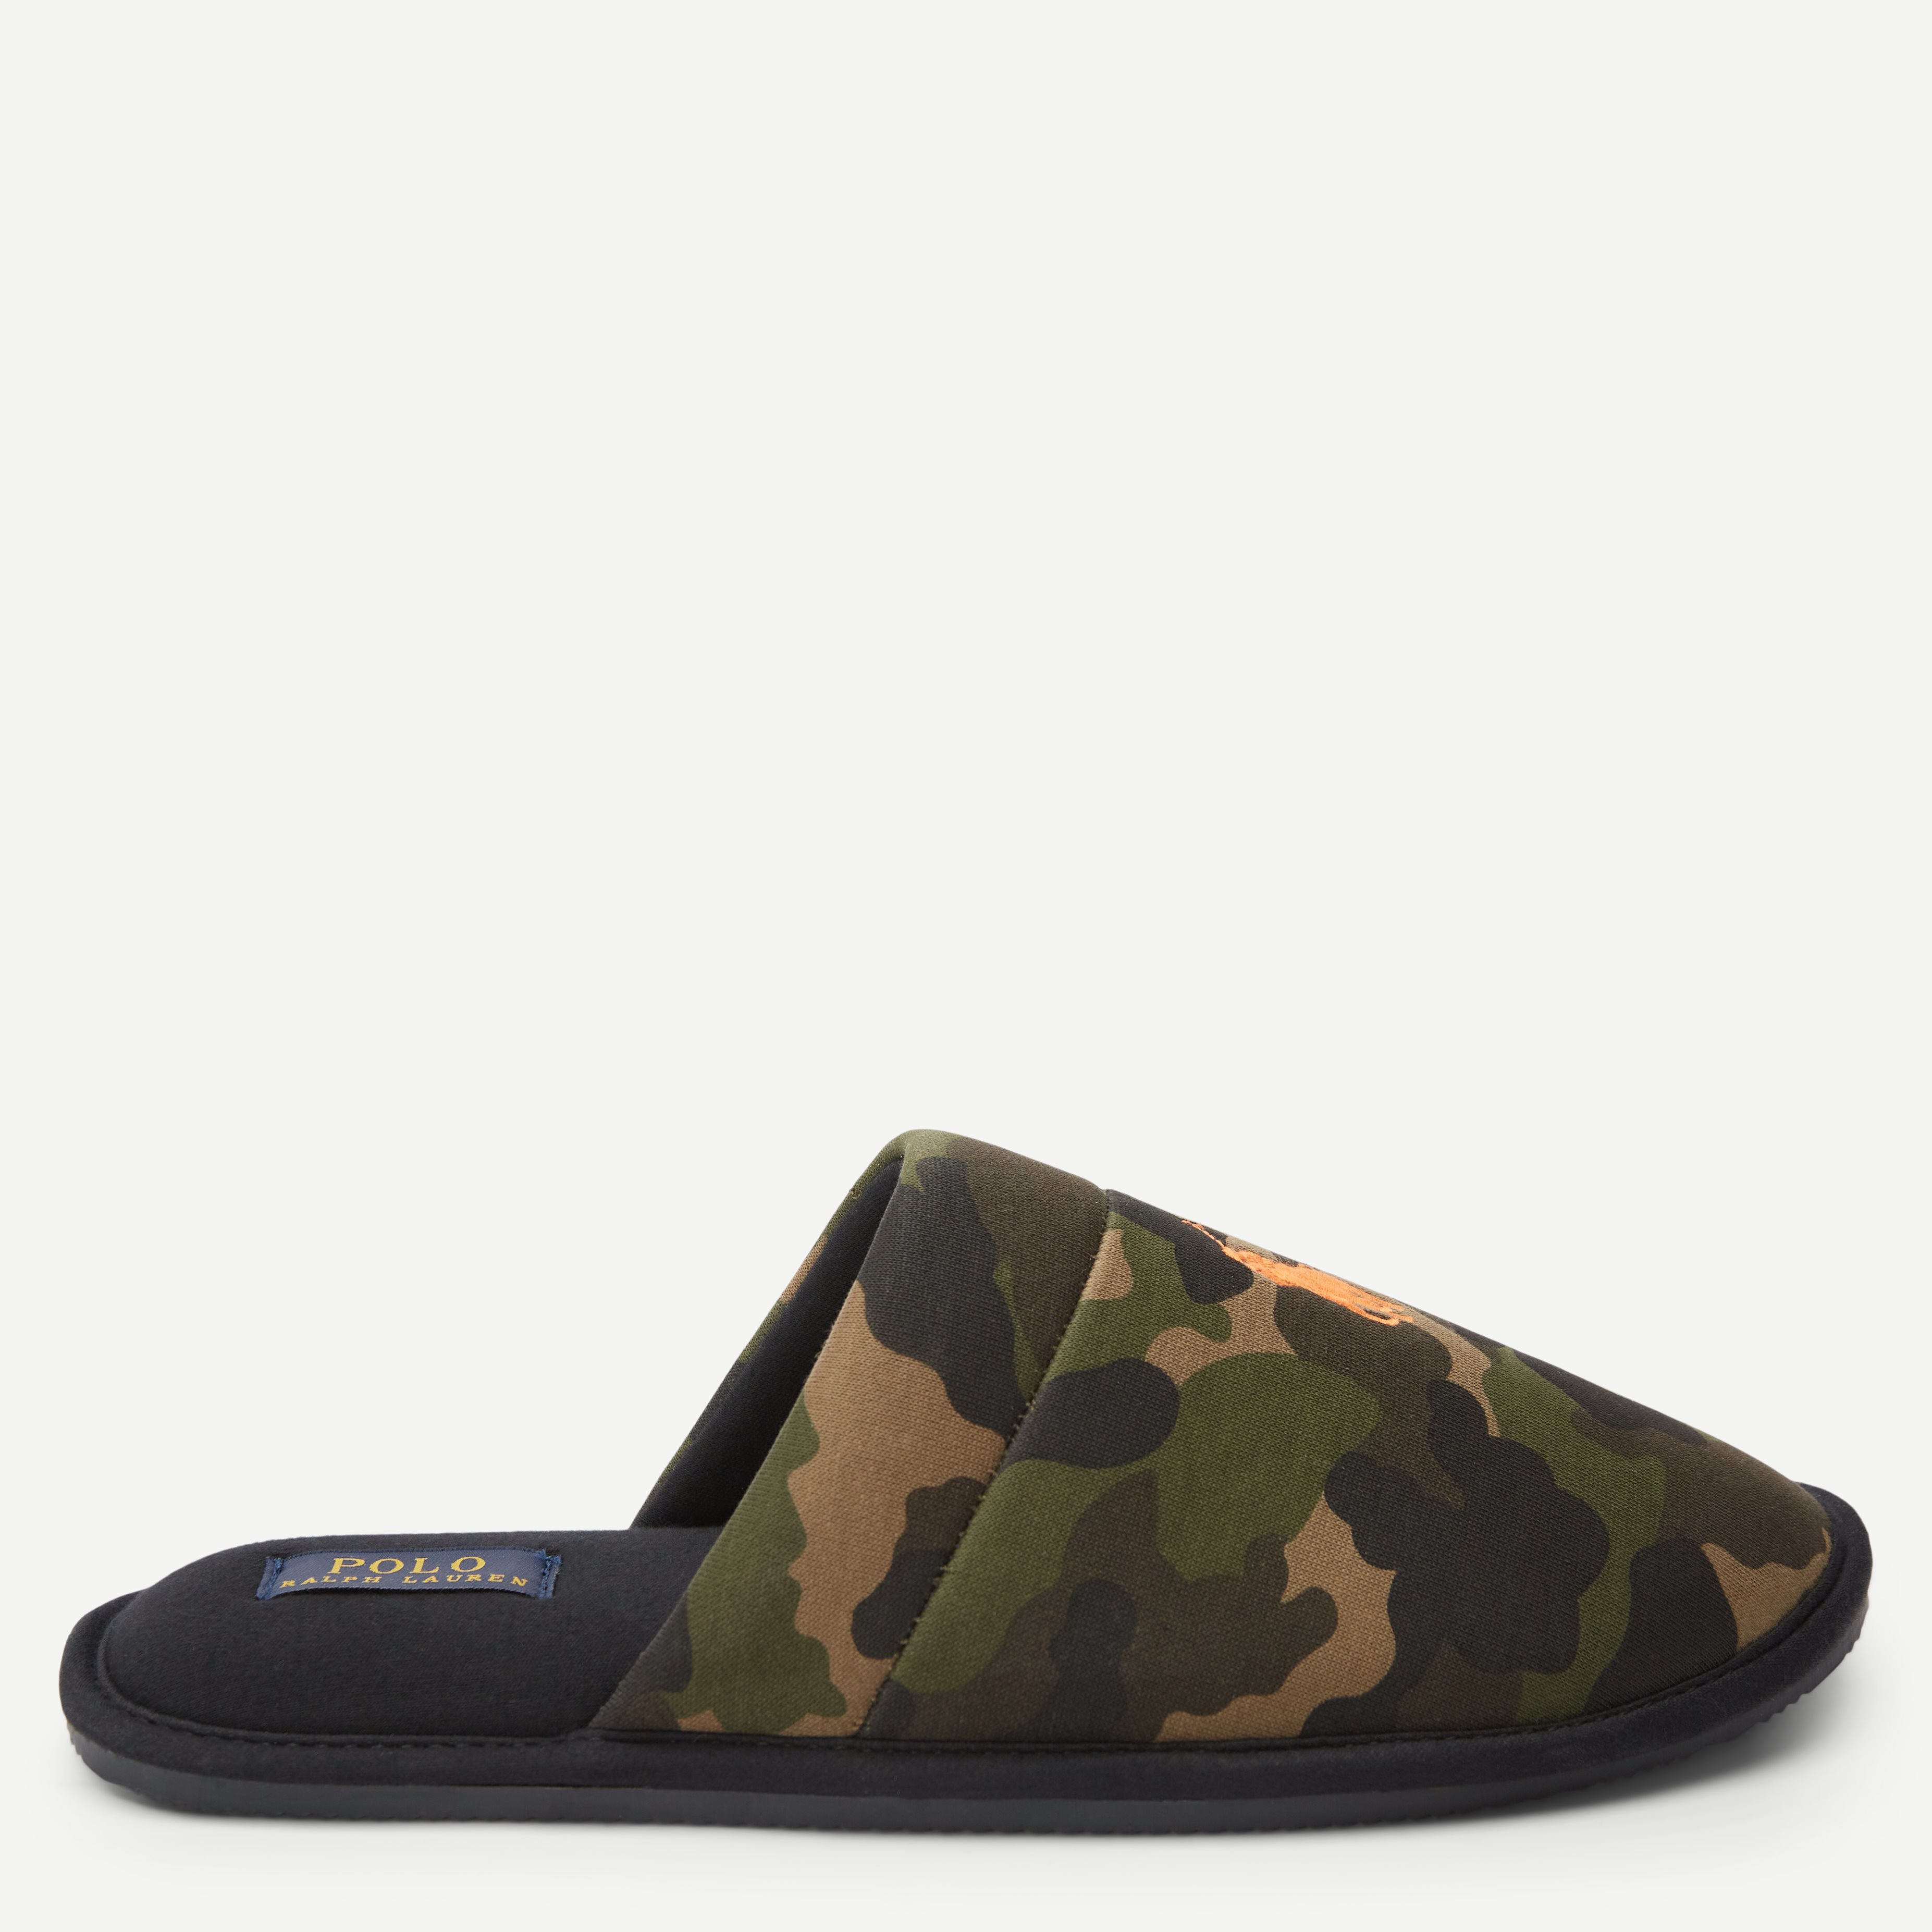 Polo Ralph Lauren Shoes KLARENCE Army